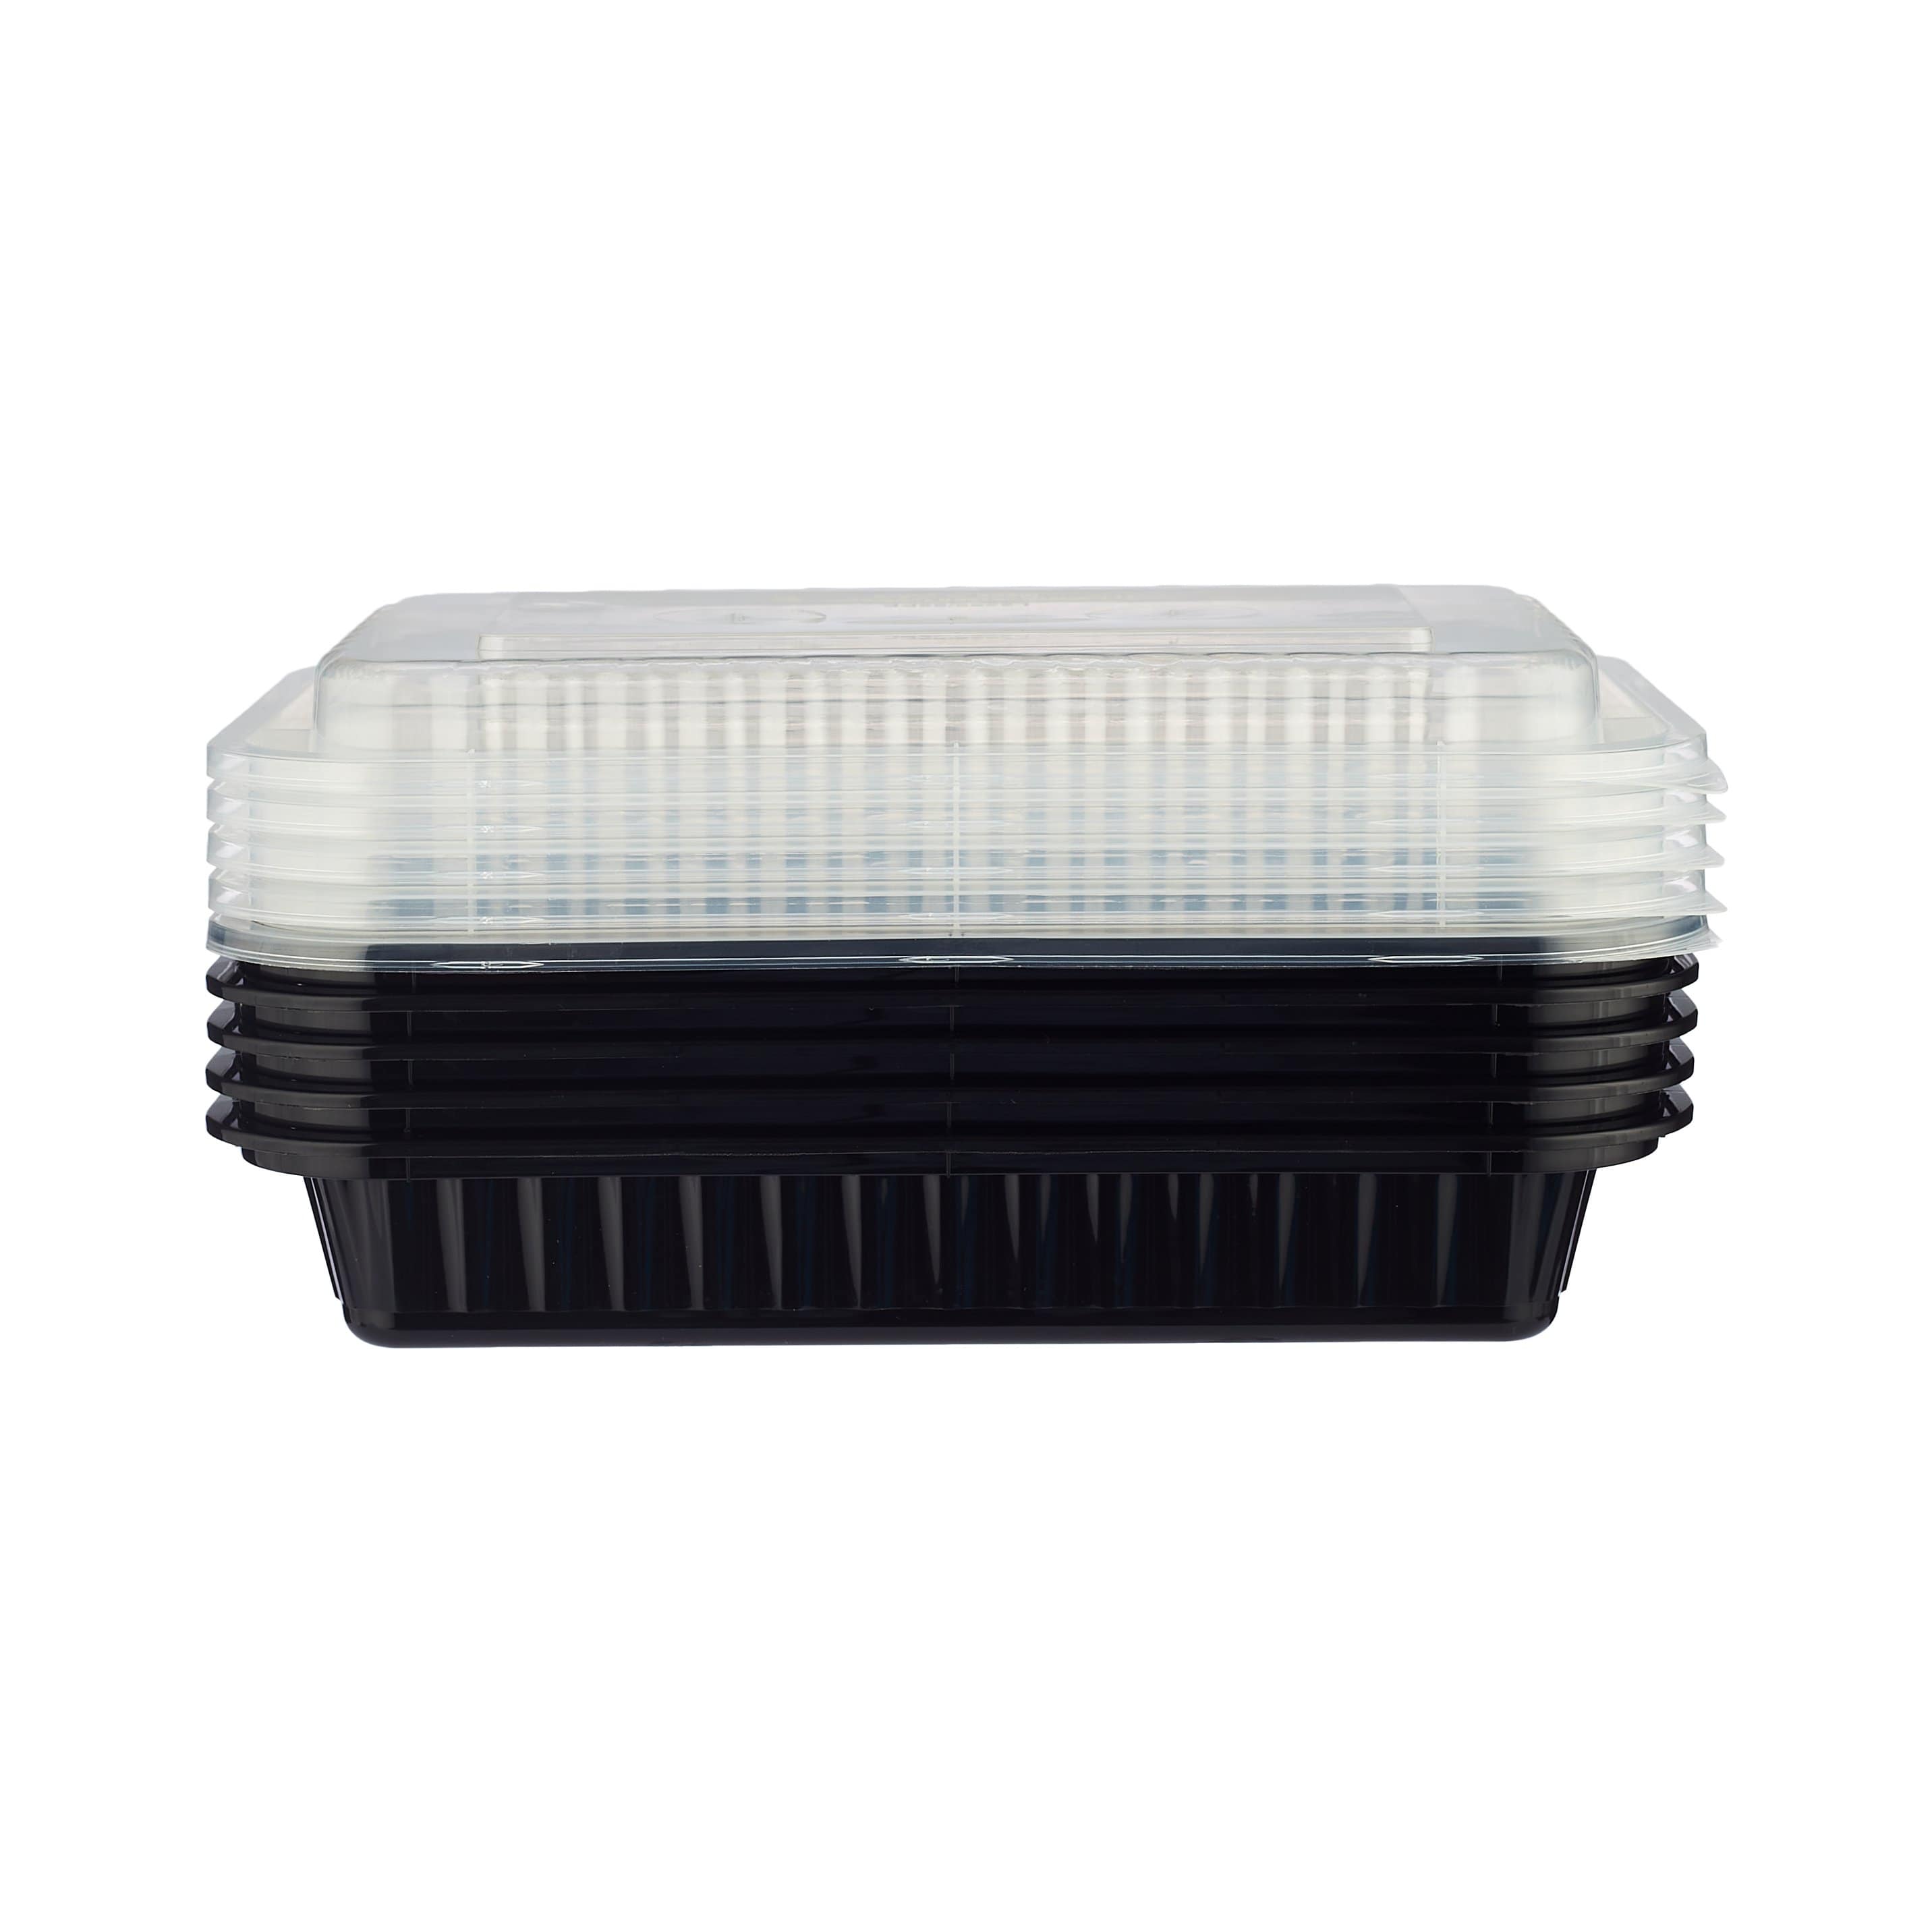 12 oz. Rectangular Black Containers and Lids, Case of 150 – CiboWares